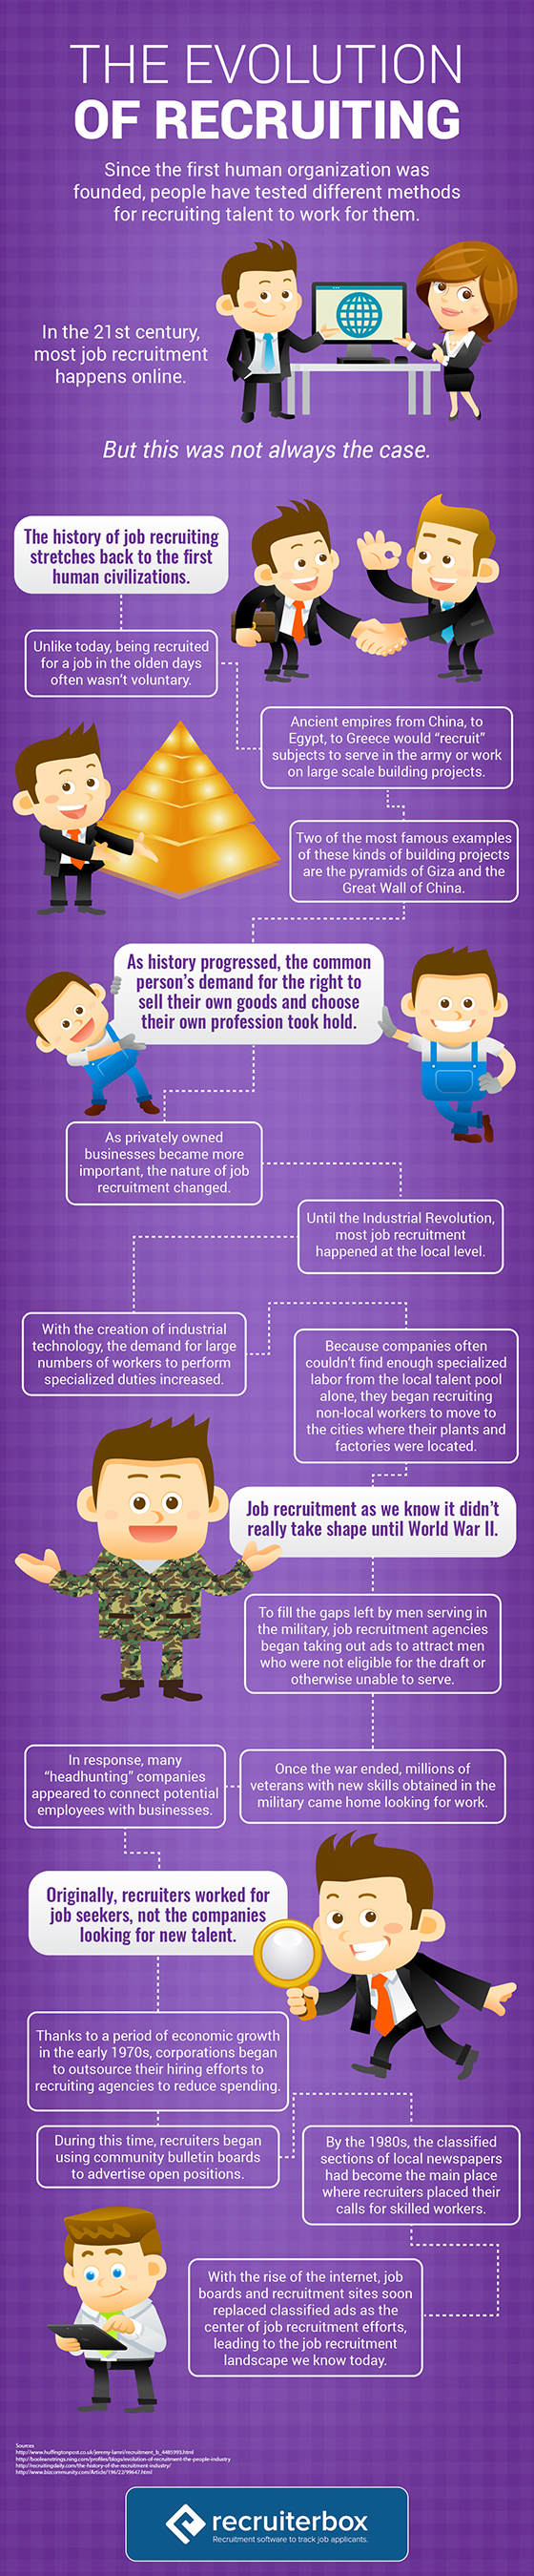 The Evolution of Recruiting – Infographic